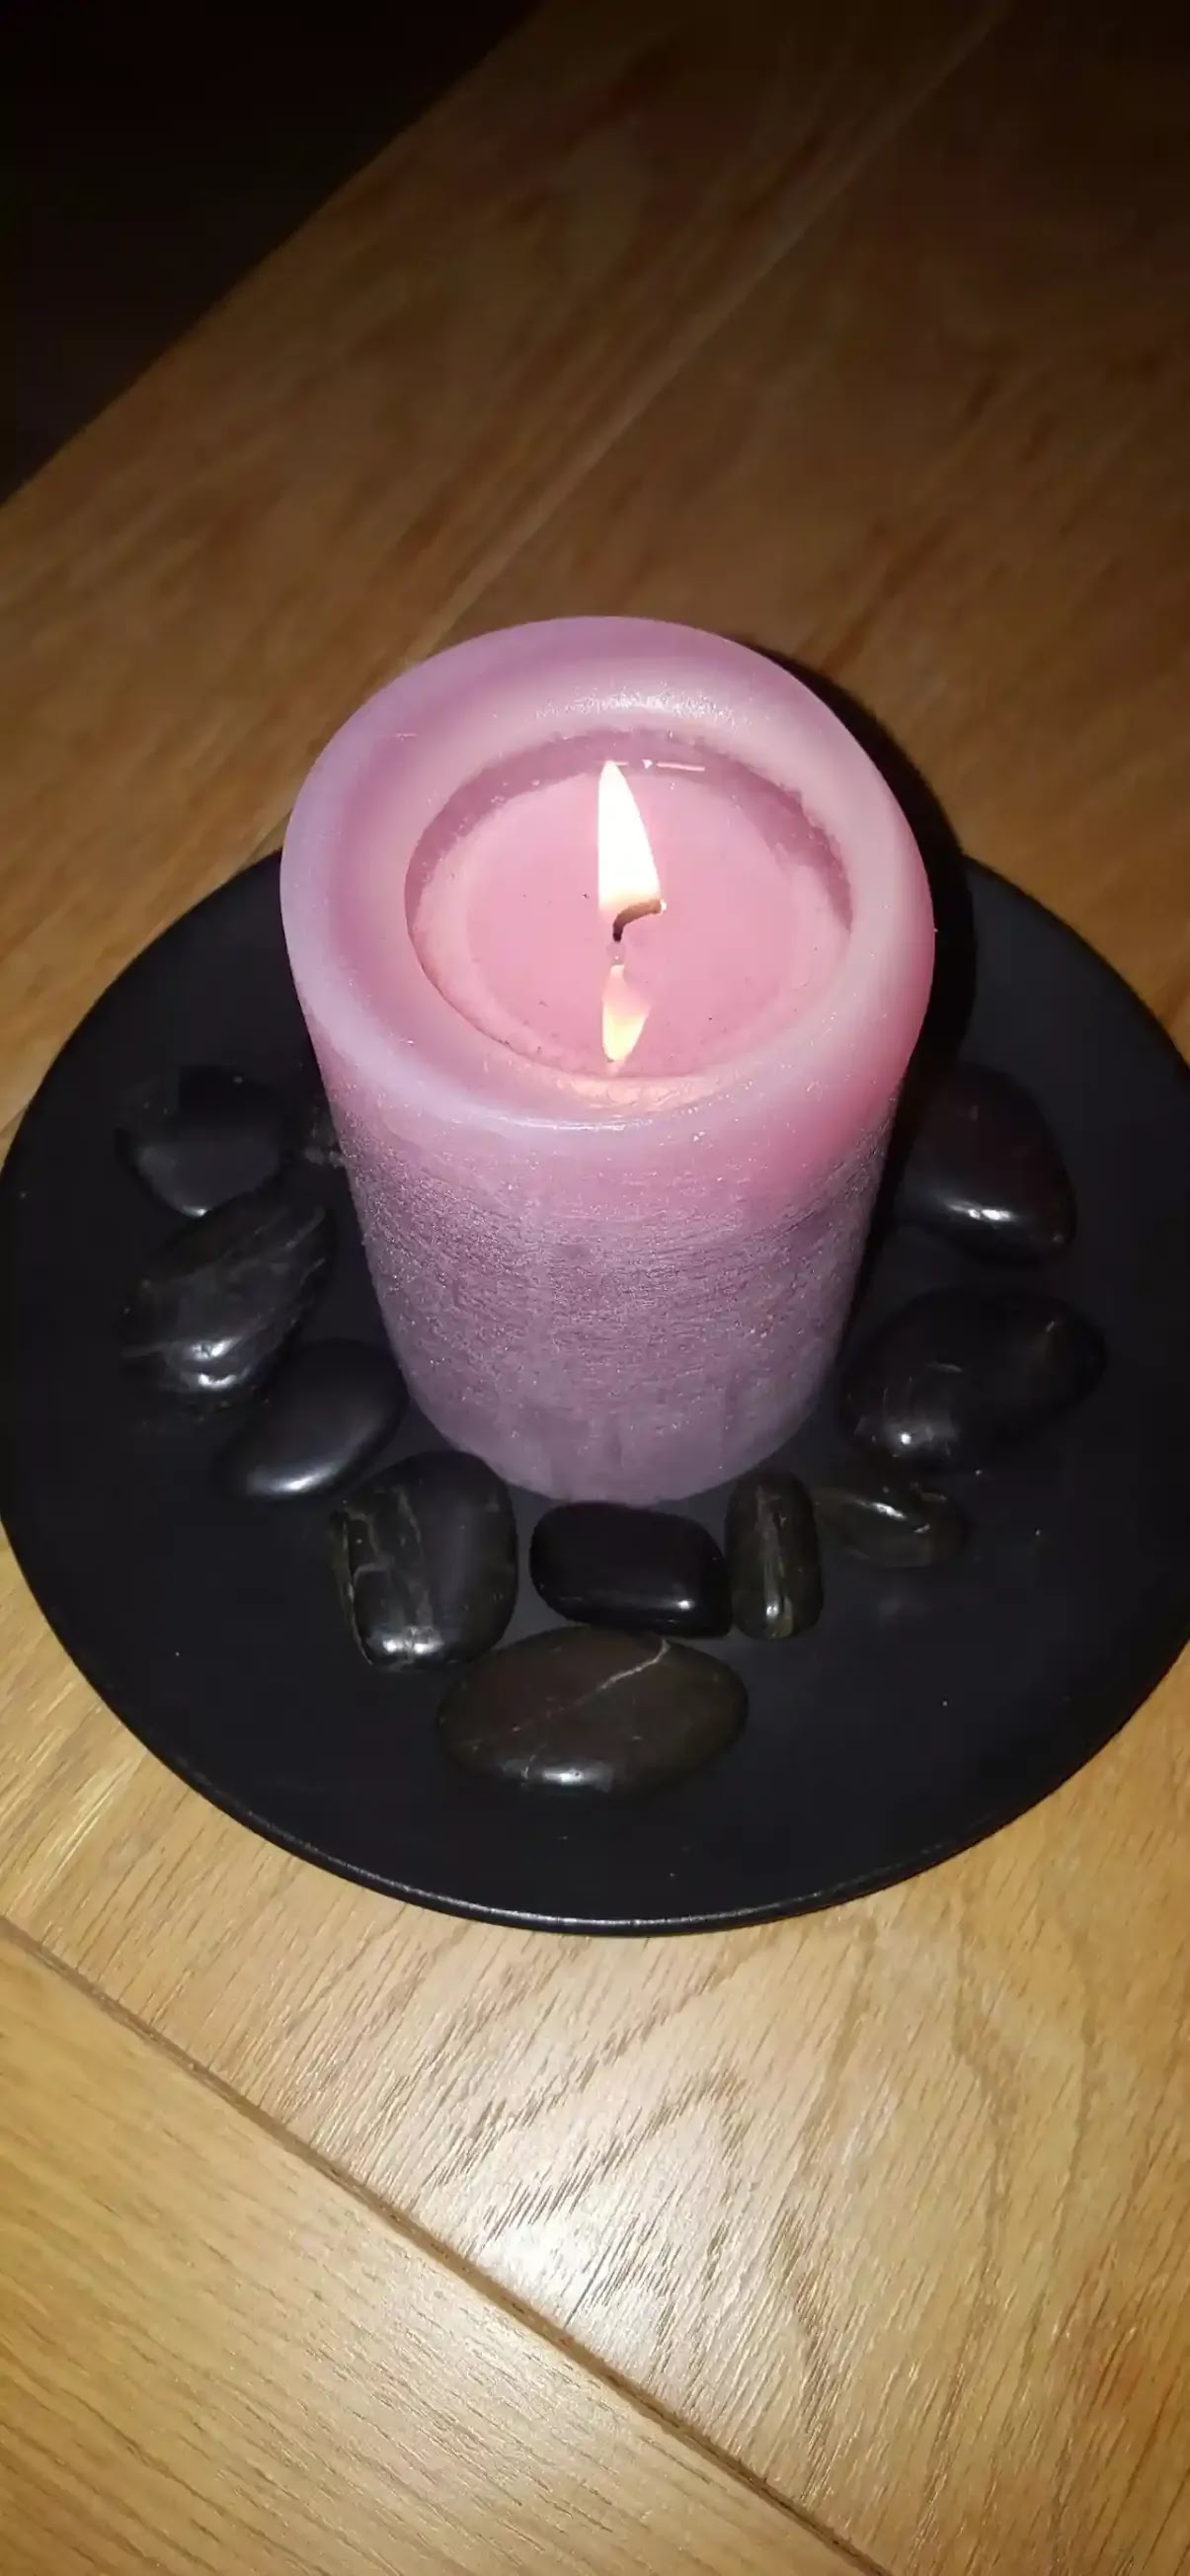 Black pink wallpaper with candles